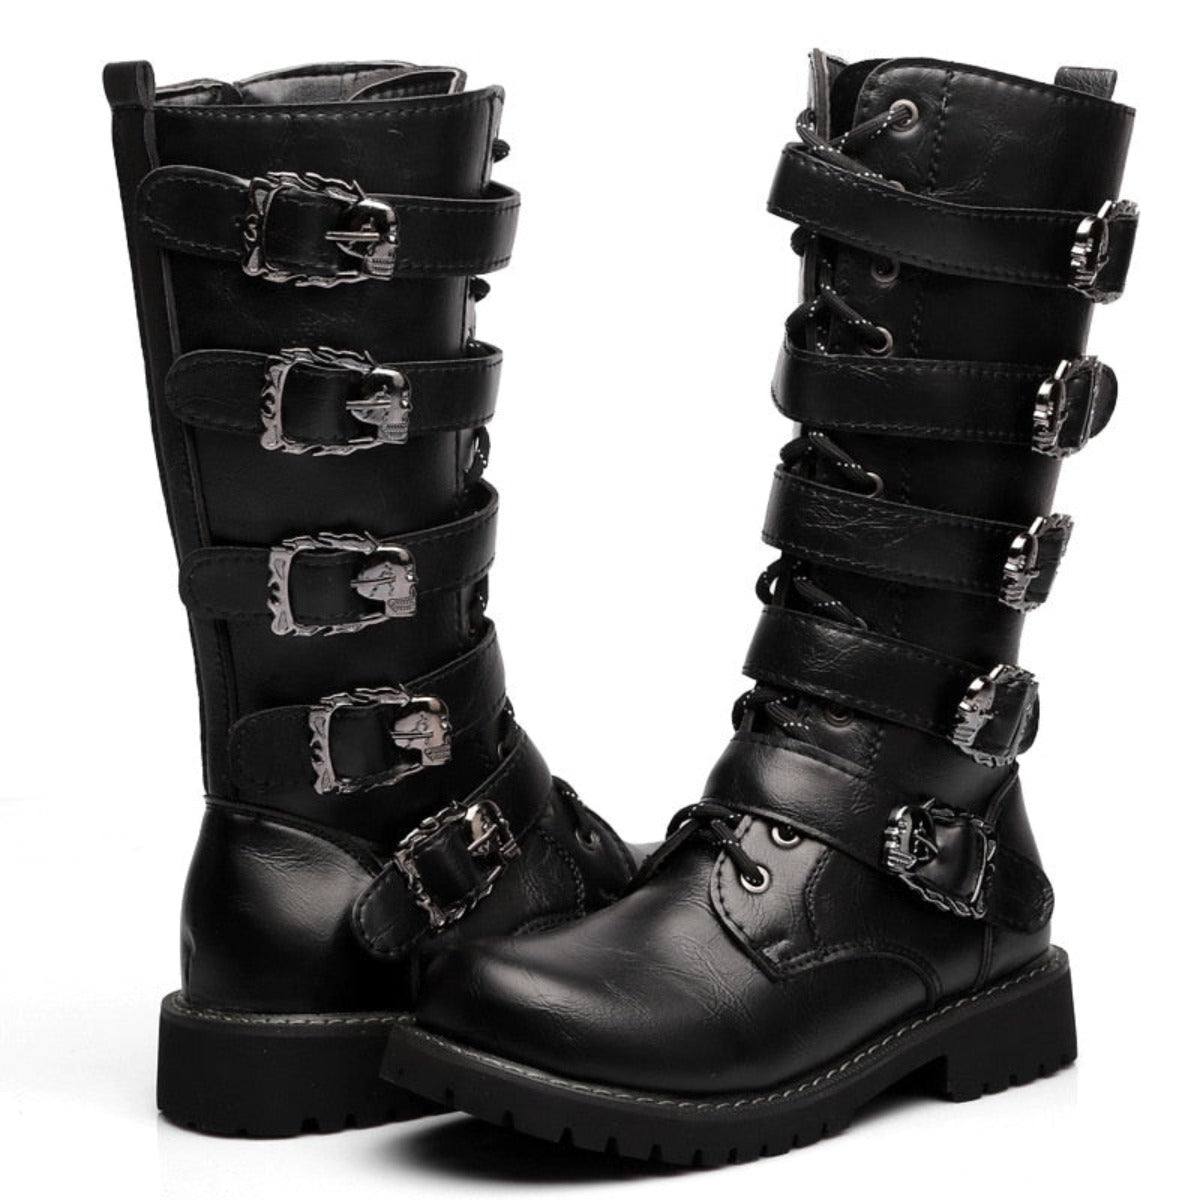 A pair of Mid-Calf Leather Motorcycle Riding Boots with comfortable fit and buckles.